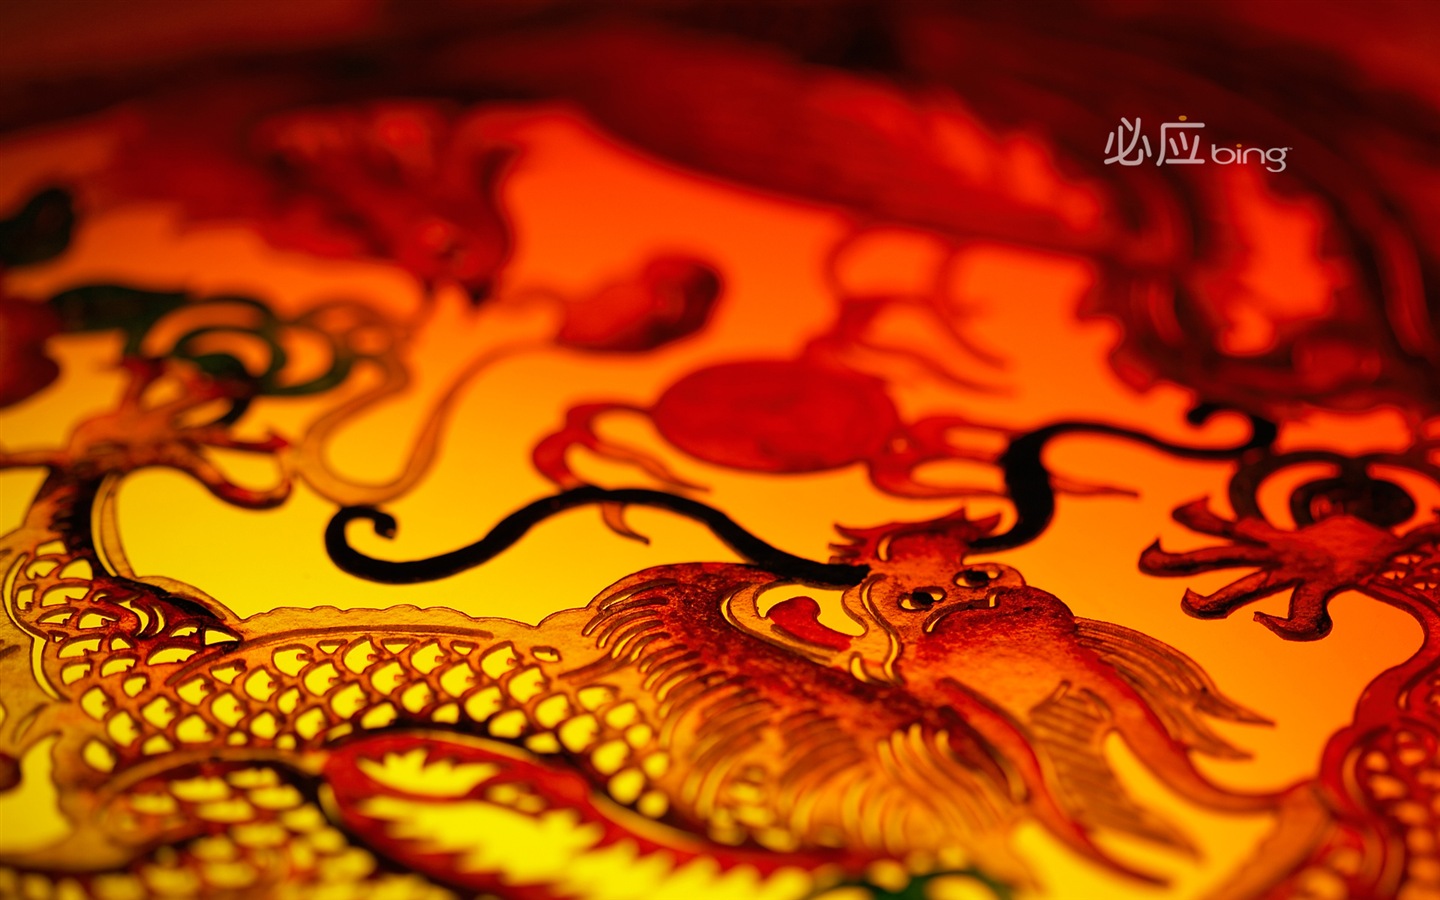 Bing selection best HD wallpapers: China theme wallpaper (2) #12 - 1440x900